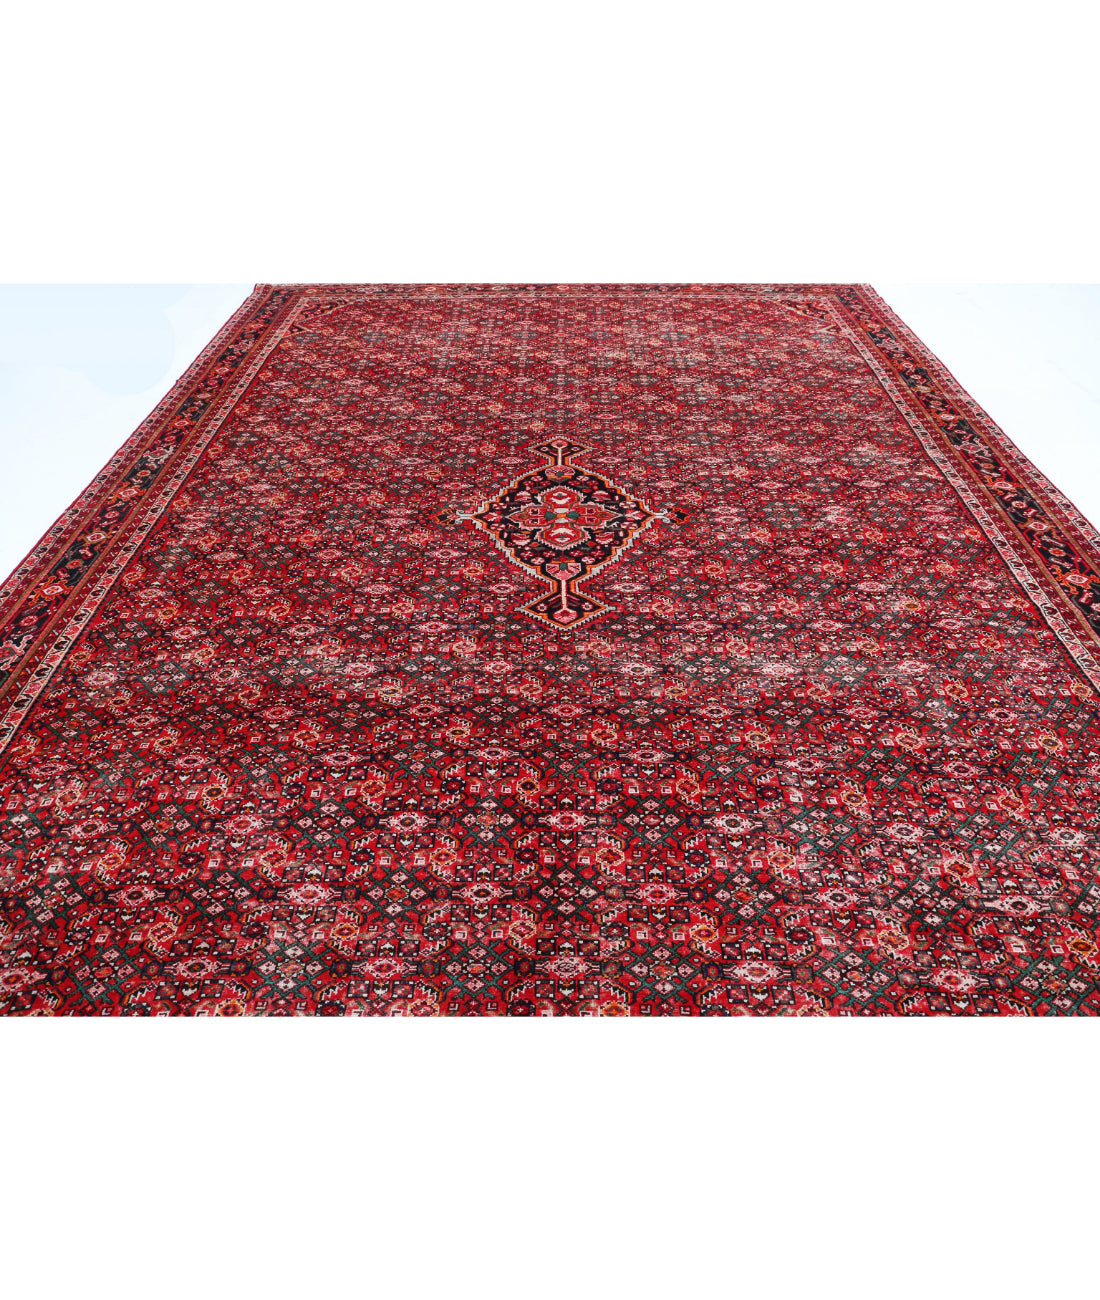 Hand Knotted Persian Hamadan Wool Rug - 11'1'' x 14'10'' 11'1'' x 14'10'' (333 X 445) / Red / Black